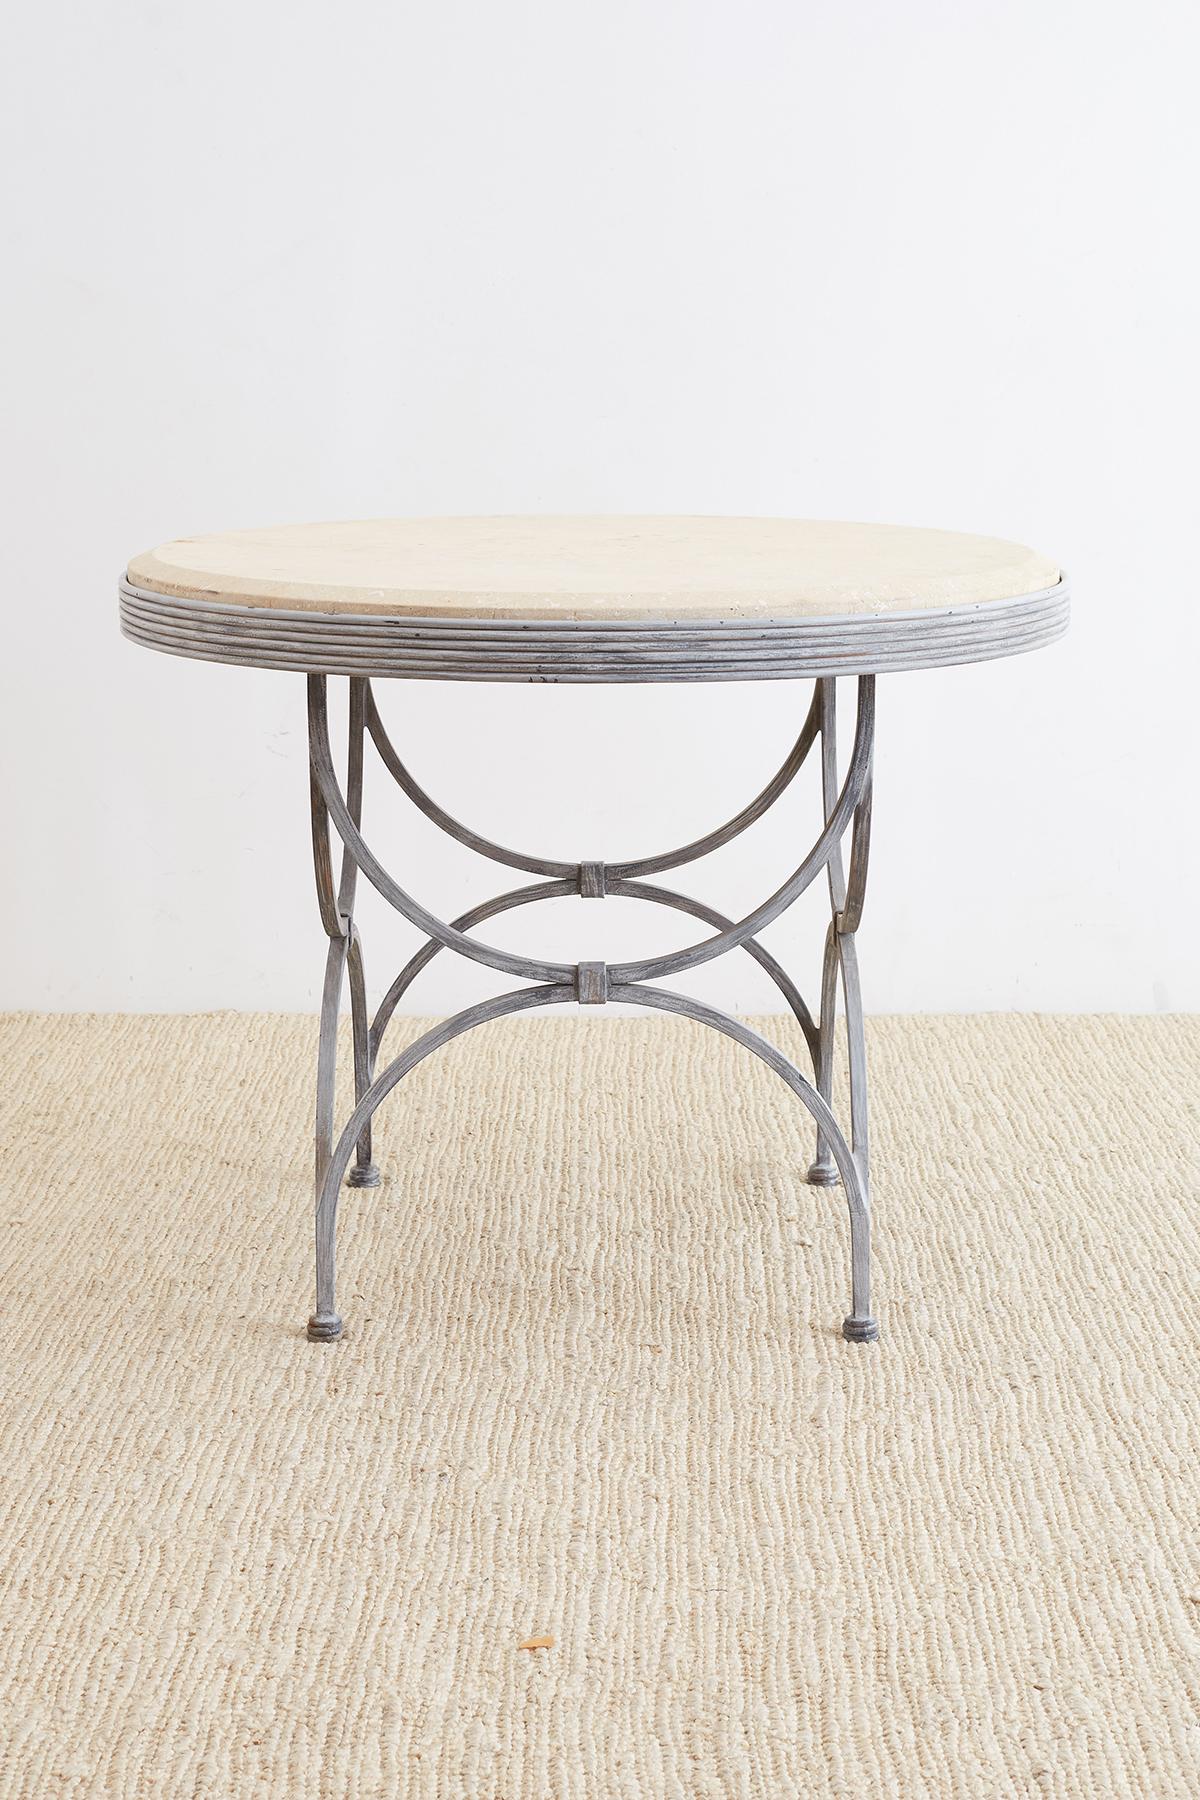 Extraordinary iron and stone patio garden table made in the neoclassical taste. Features a thick molded stone top with a beveled edge. The elegant base has a reeded edge and is supported by curved curule style legs conjoined on top and bottom.